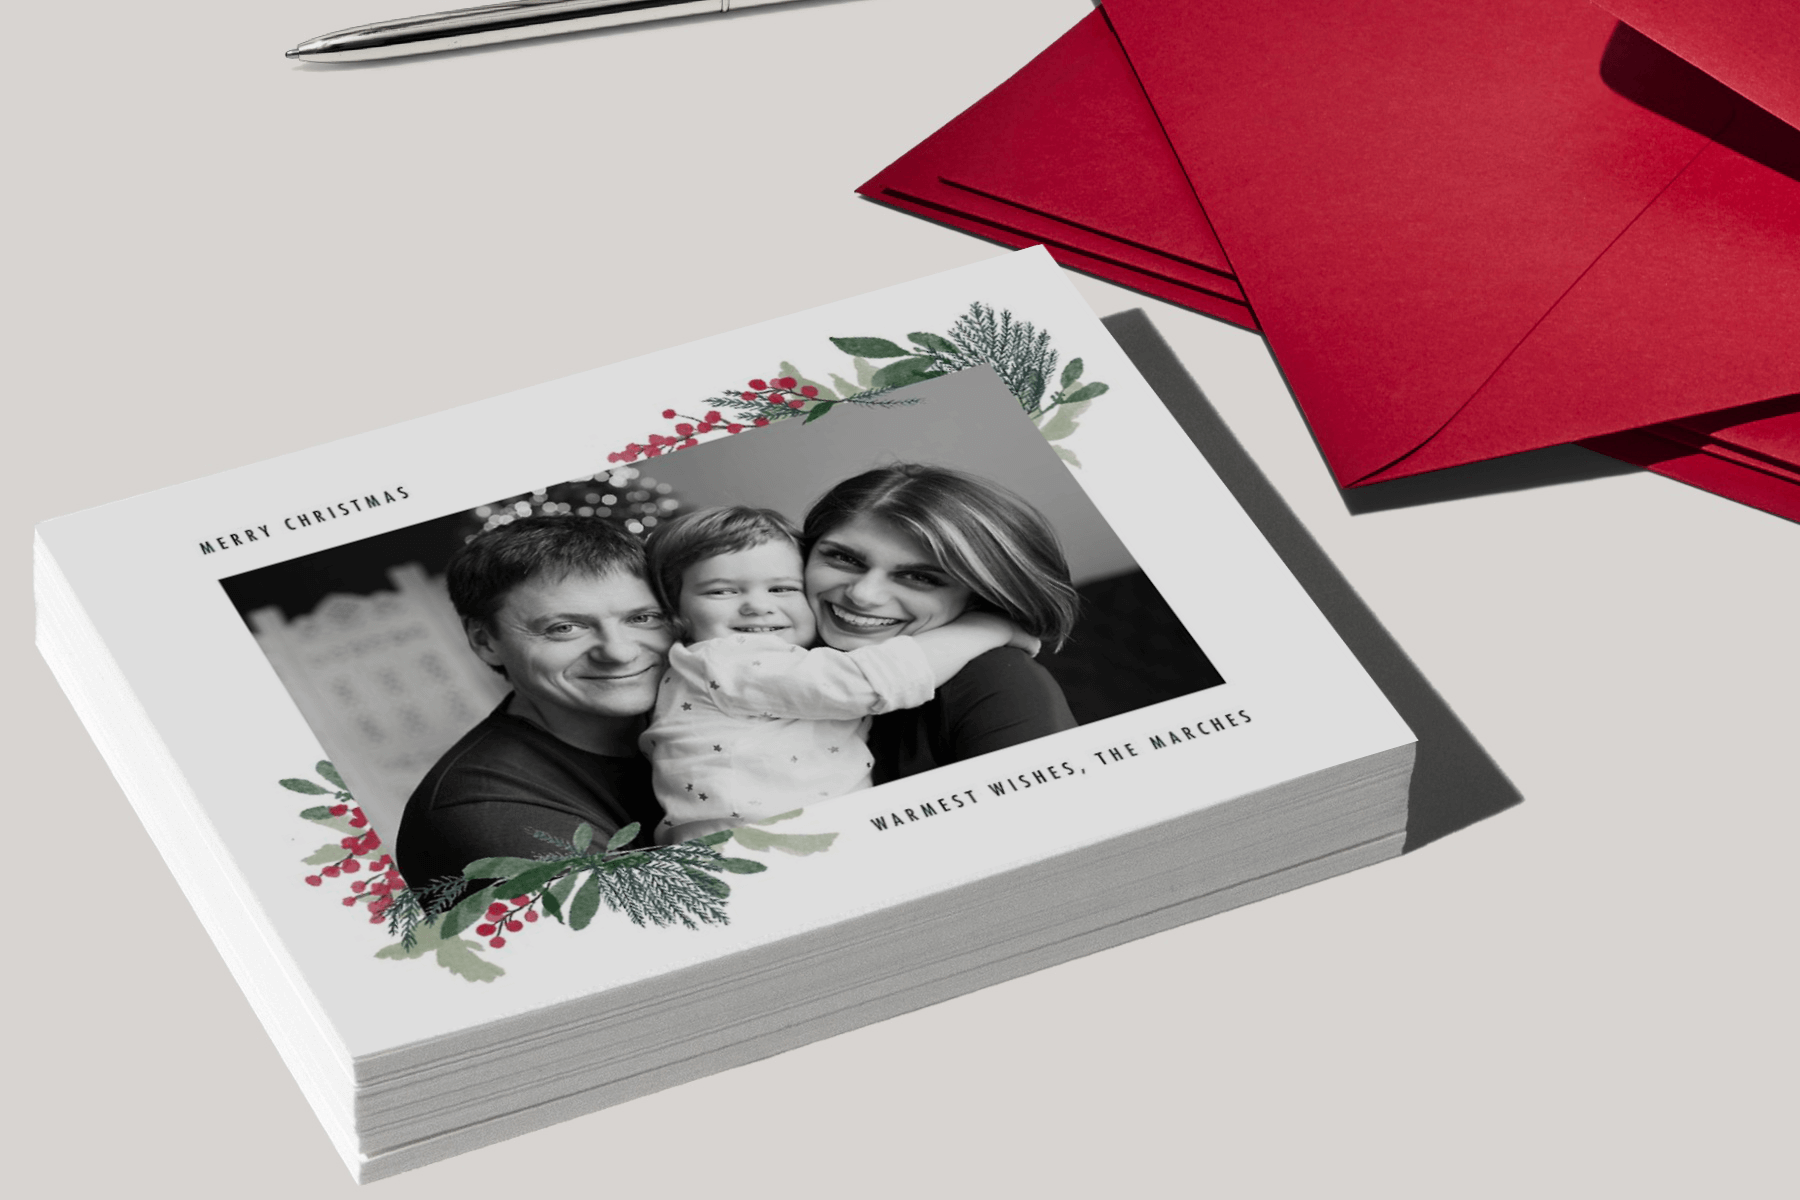 A stack of holiday cards with a black and white photo of a family surrounded by holly sprigs, next to several red envelopes.